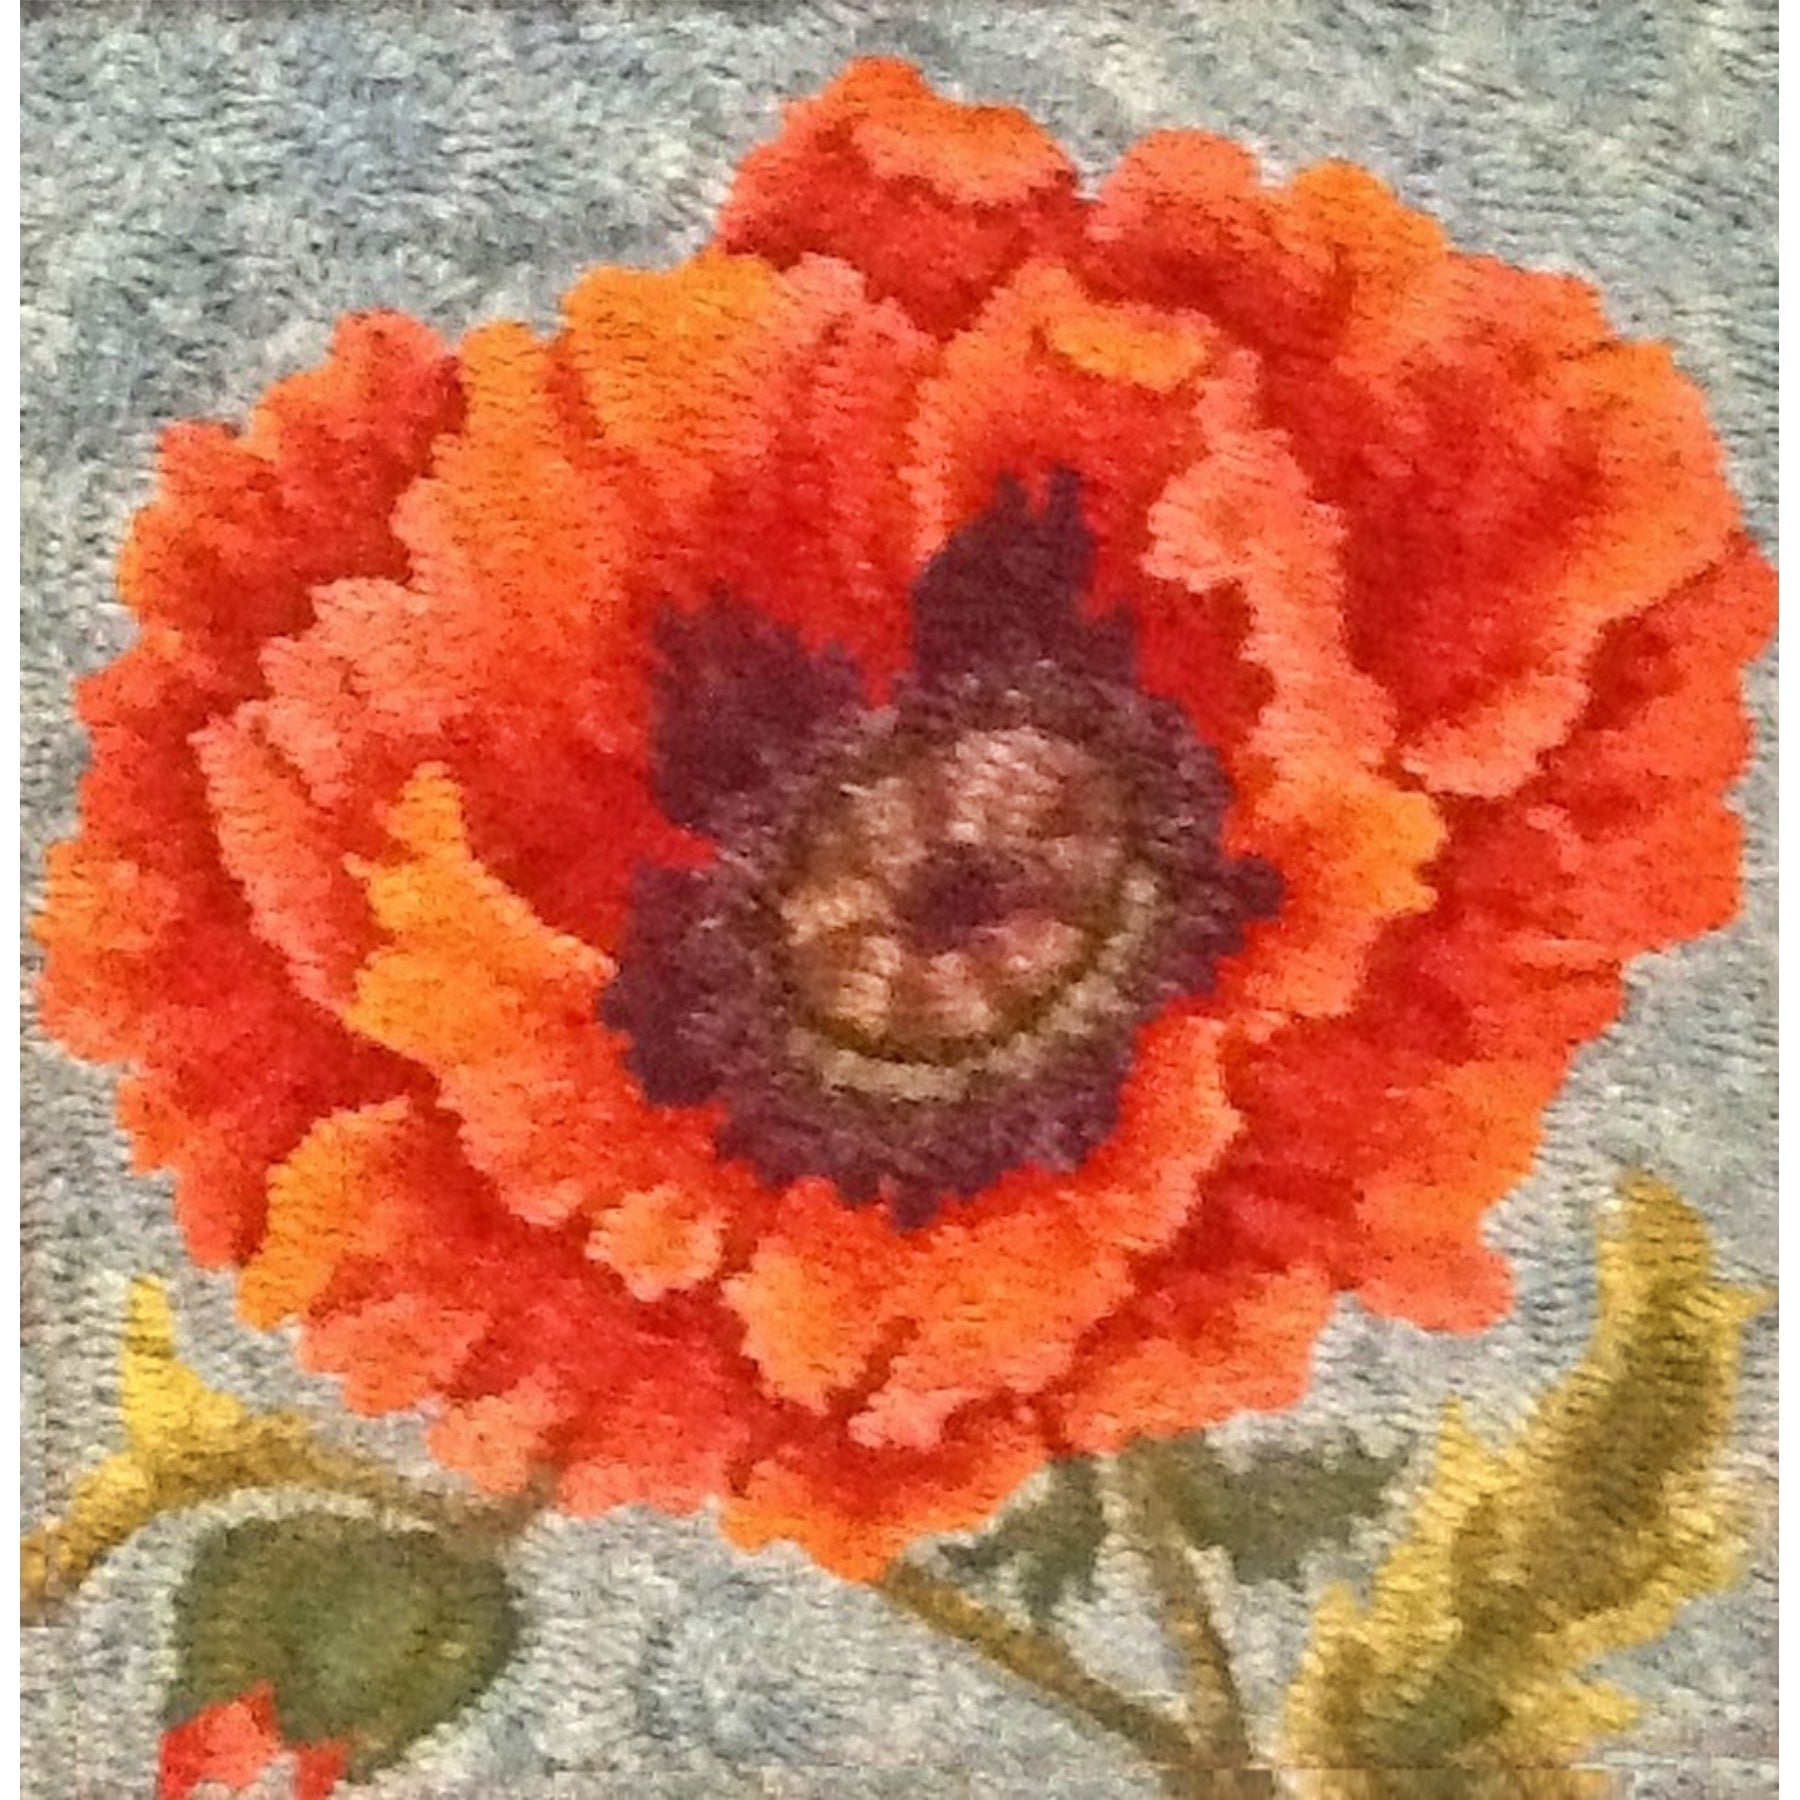 Poppy-A La O'Keefe, rug hooked by Vivily Powers